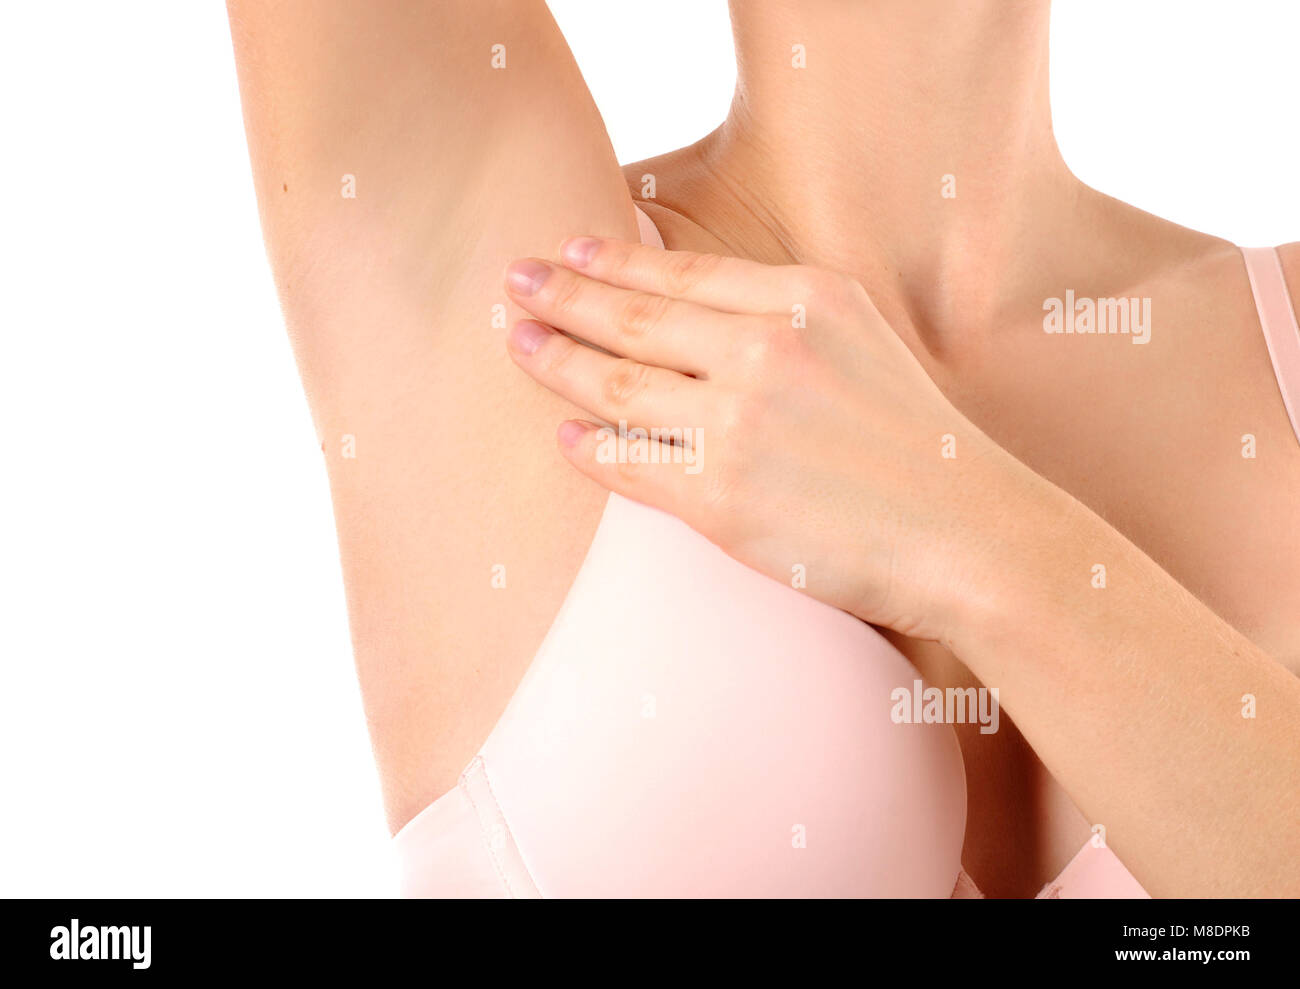 Depilation armpit, hair removing. Woman holding her arms up and showing clean  underarms Stock Photo - Alamy